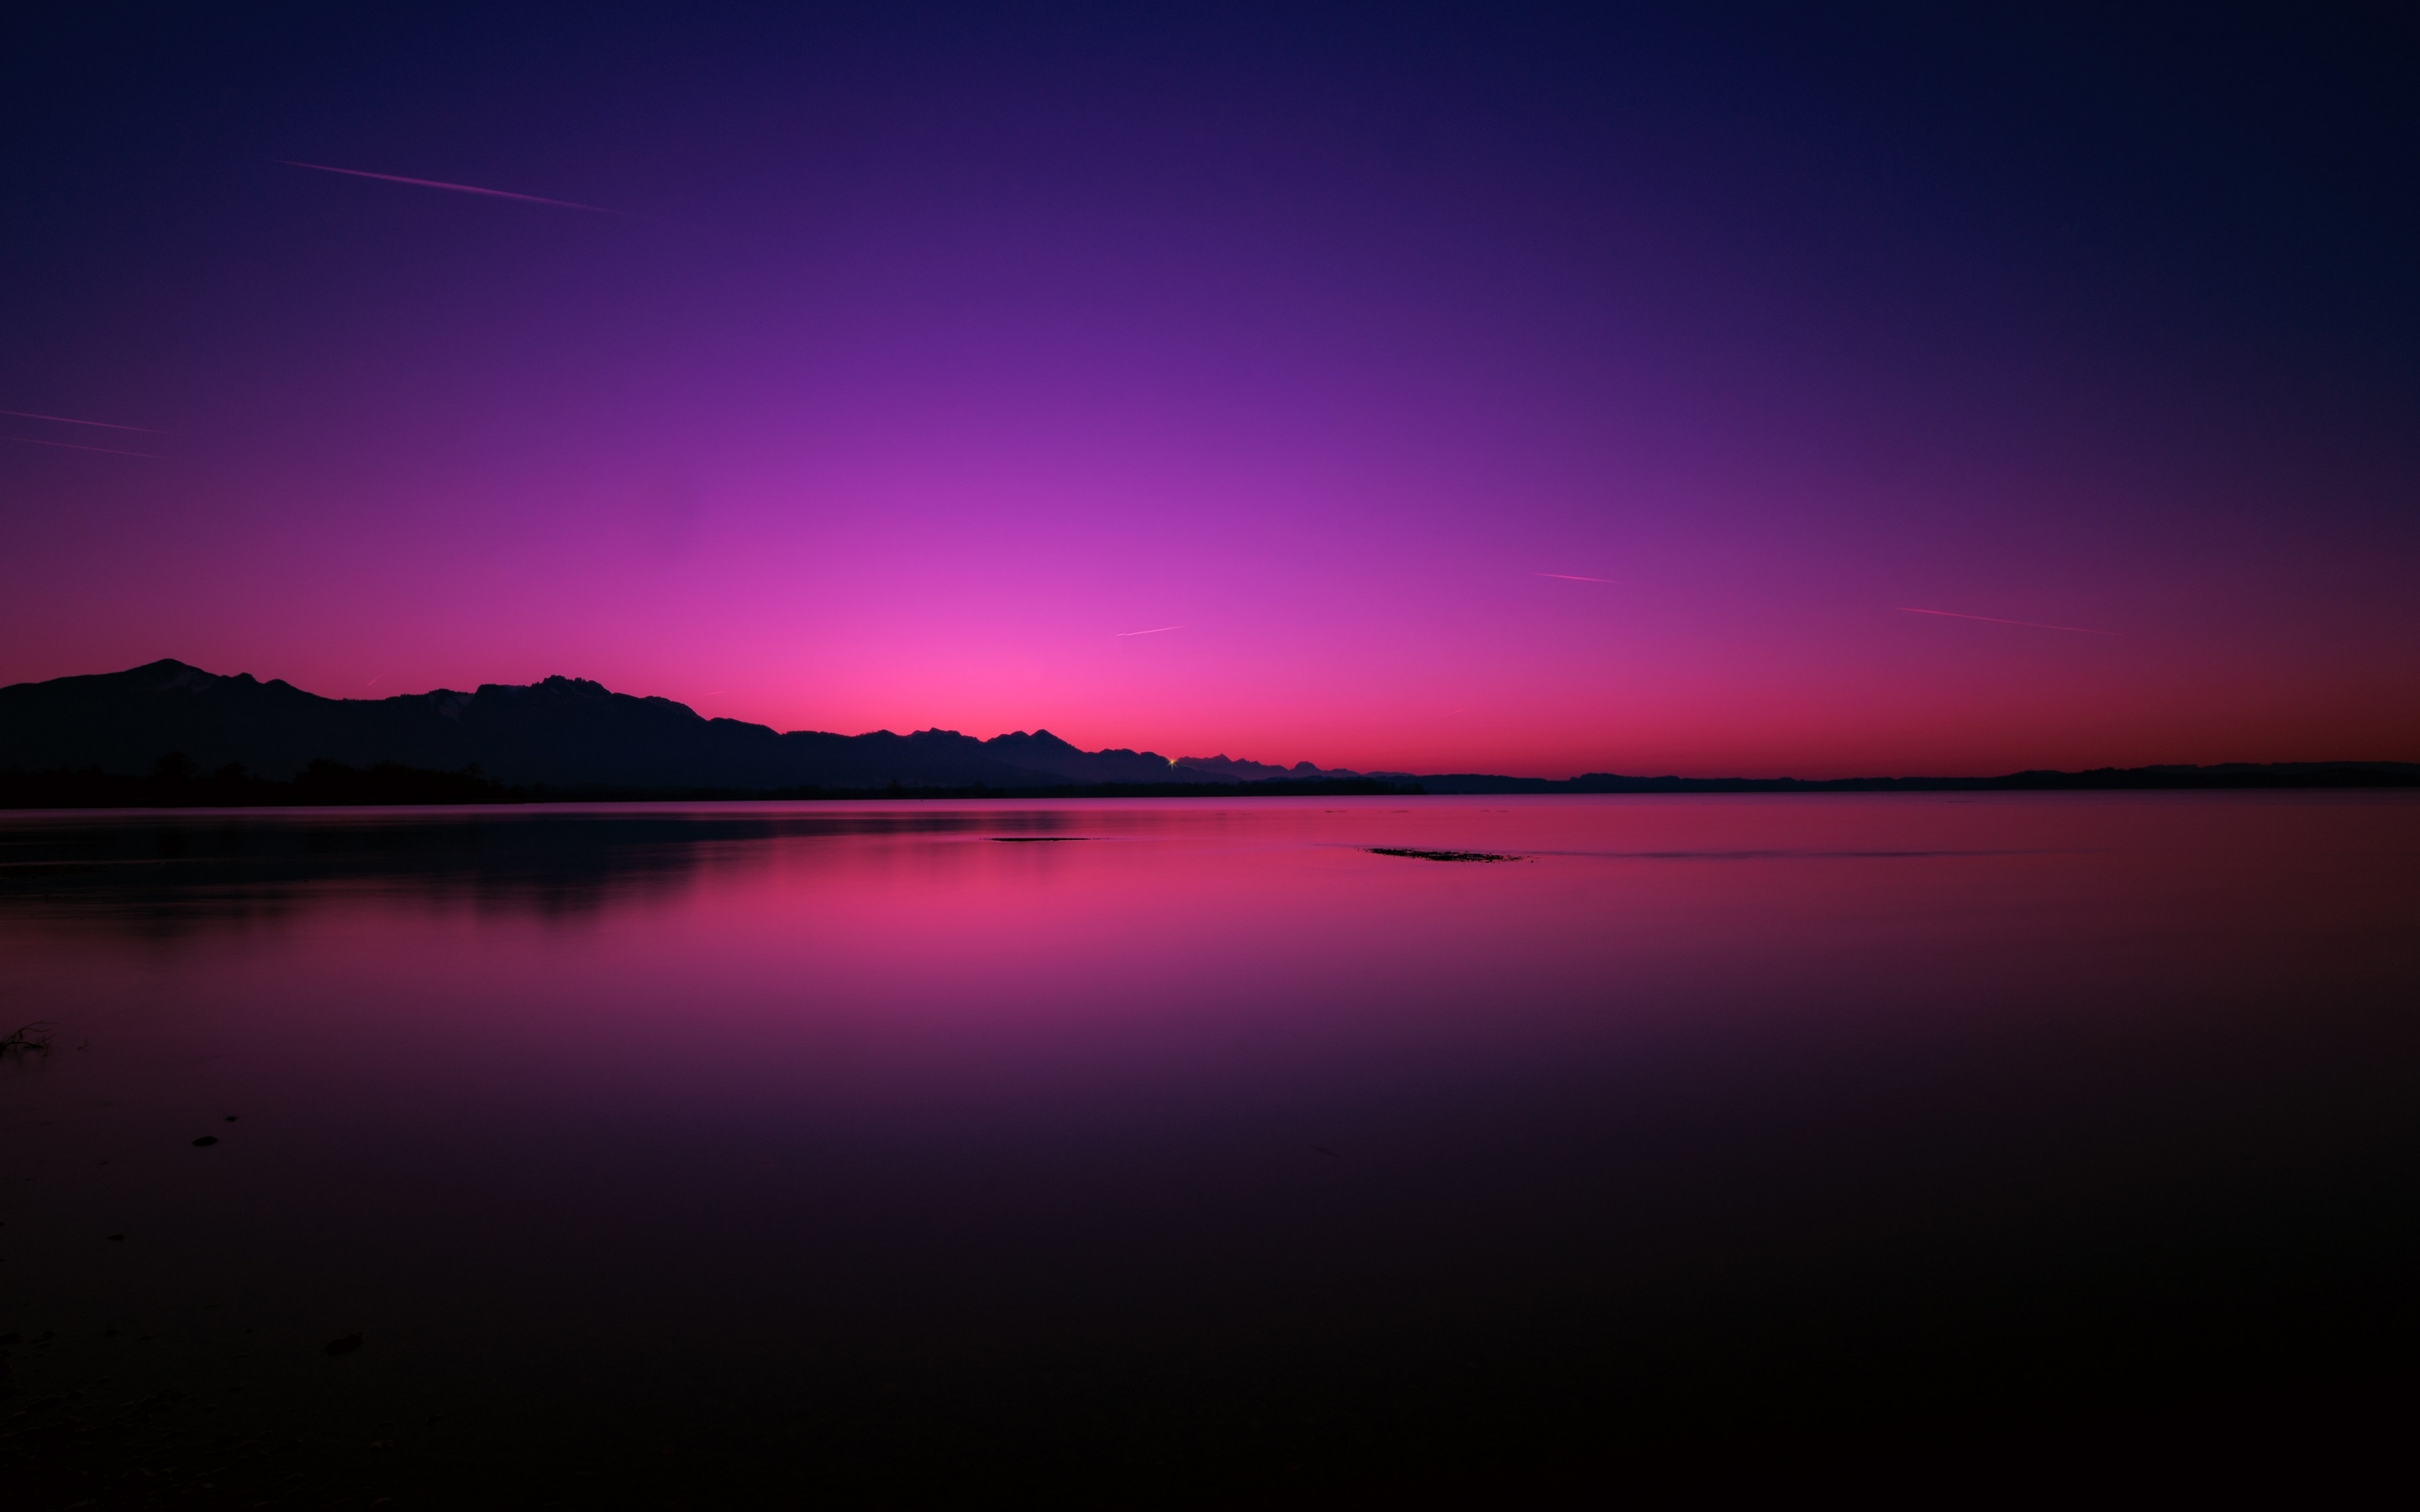 What is the title of this picture ? Sunset Wallpaper 4K, Lake, Dusk, Purple sky, Reflection, Dawn, Nature, #329